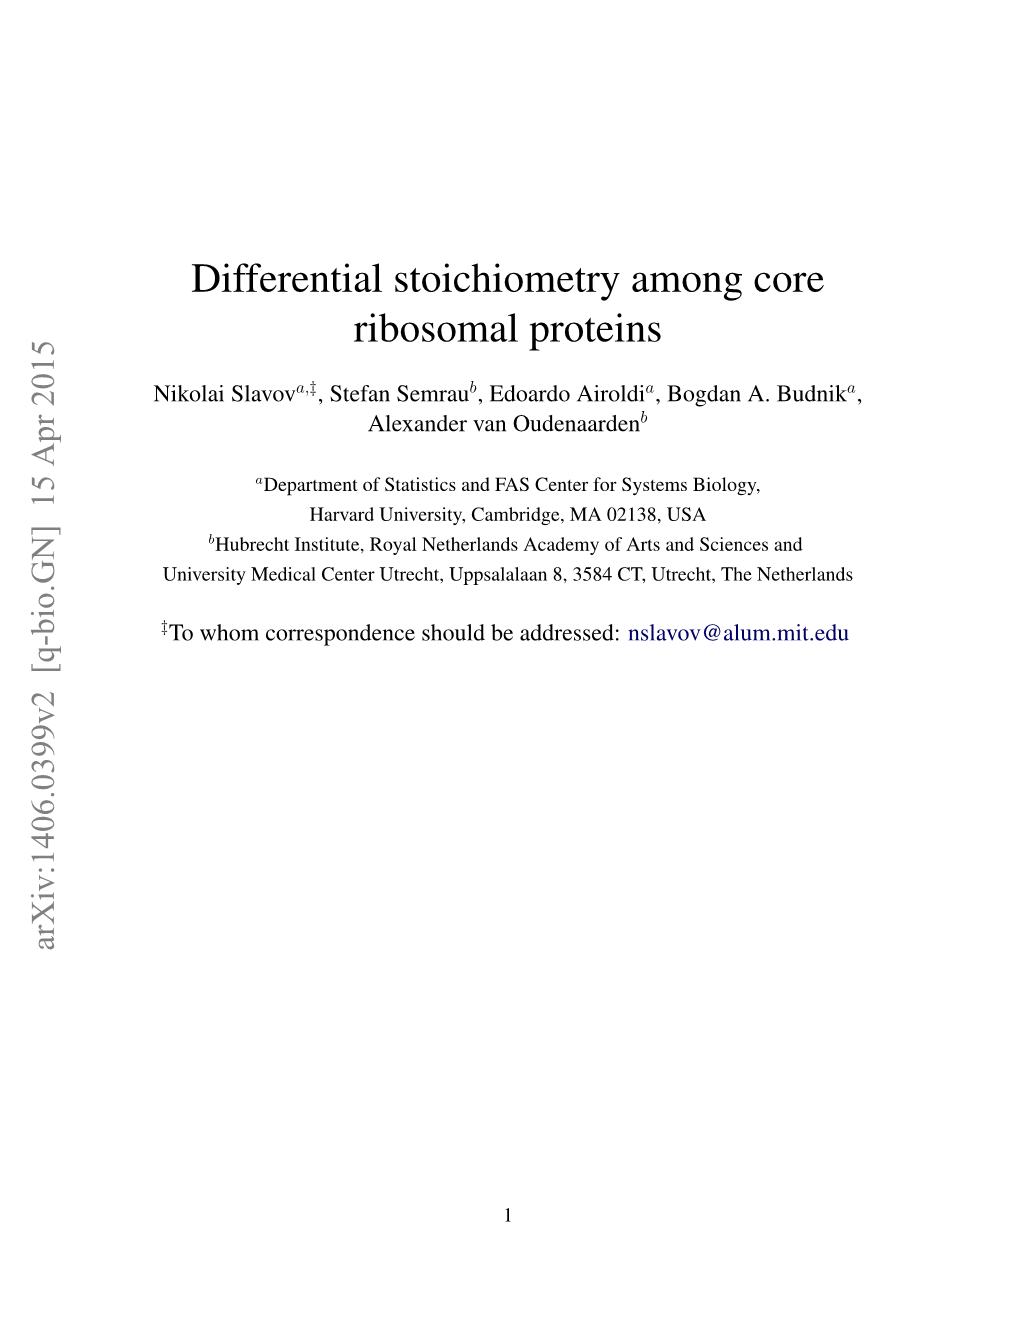 Differential Stoichiometry Among Core Ribosomal Proteins